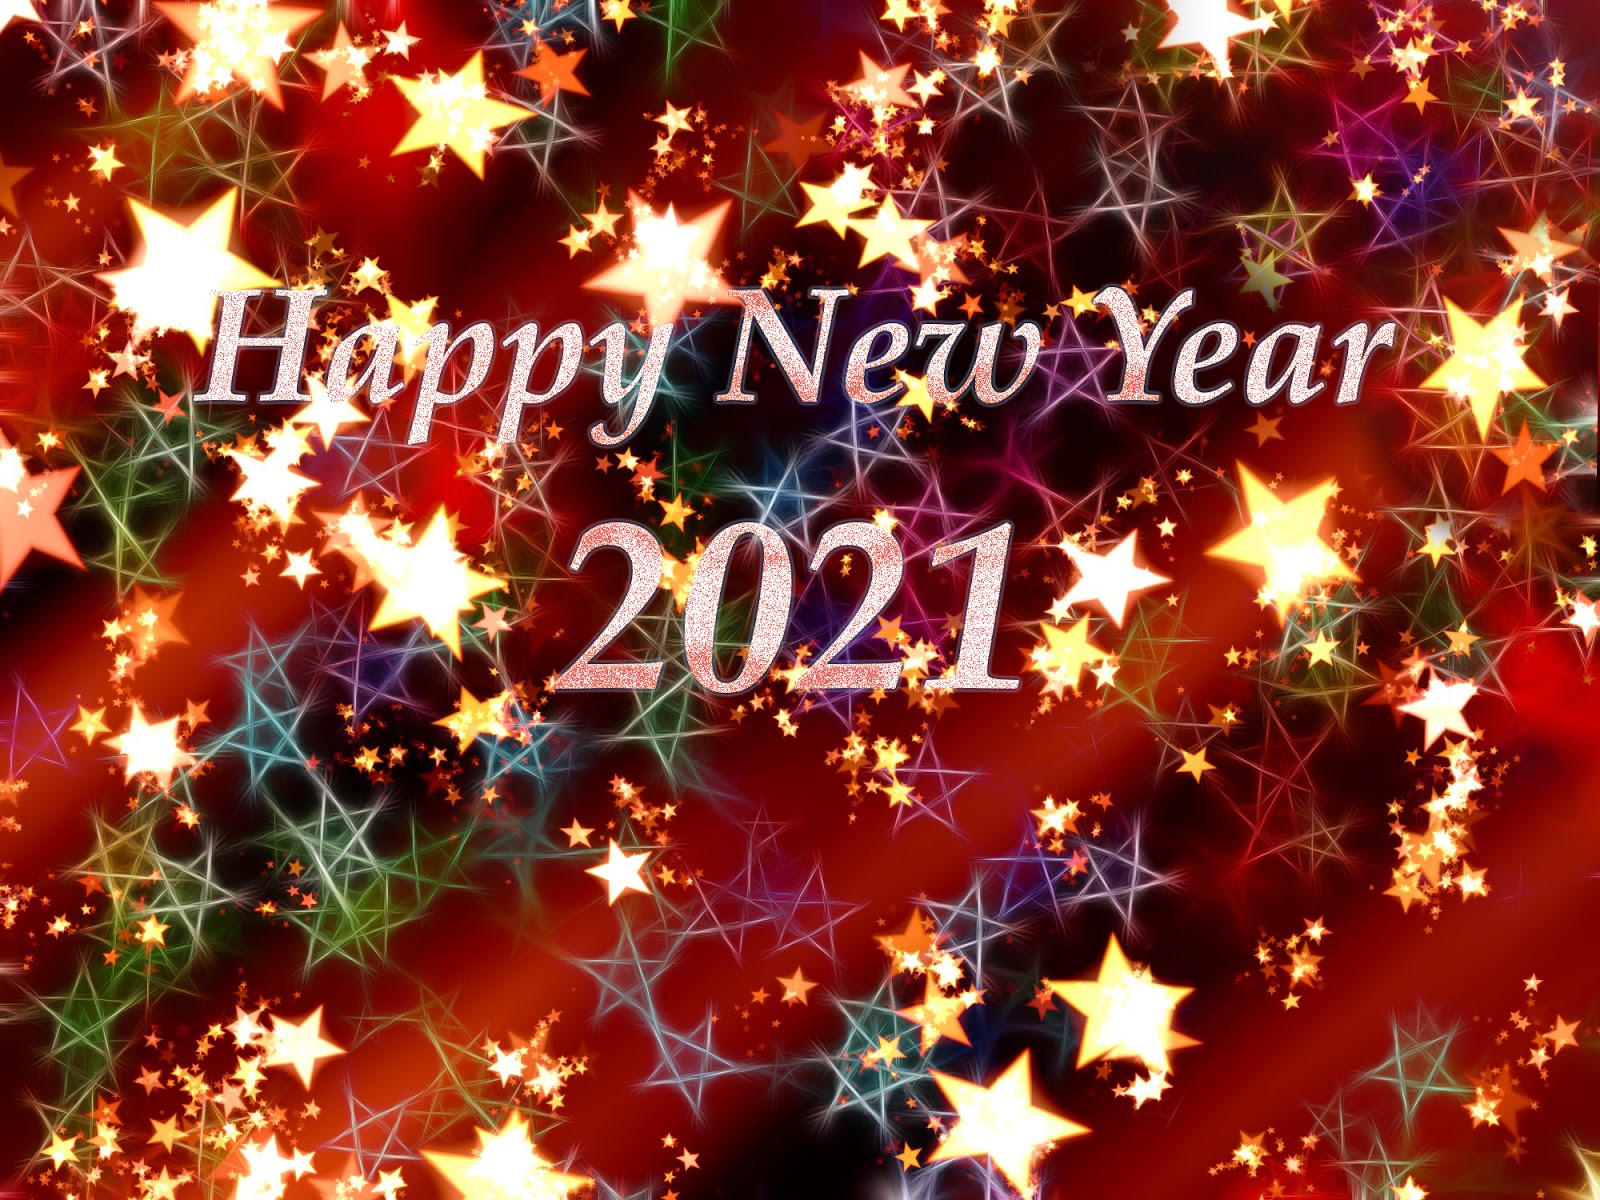  Happy  New  Year  2021  Wallpapers  HD  Images 2021  Happy  New  